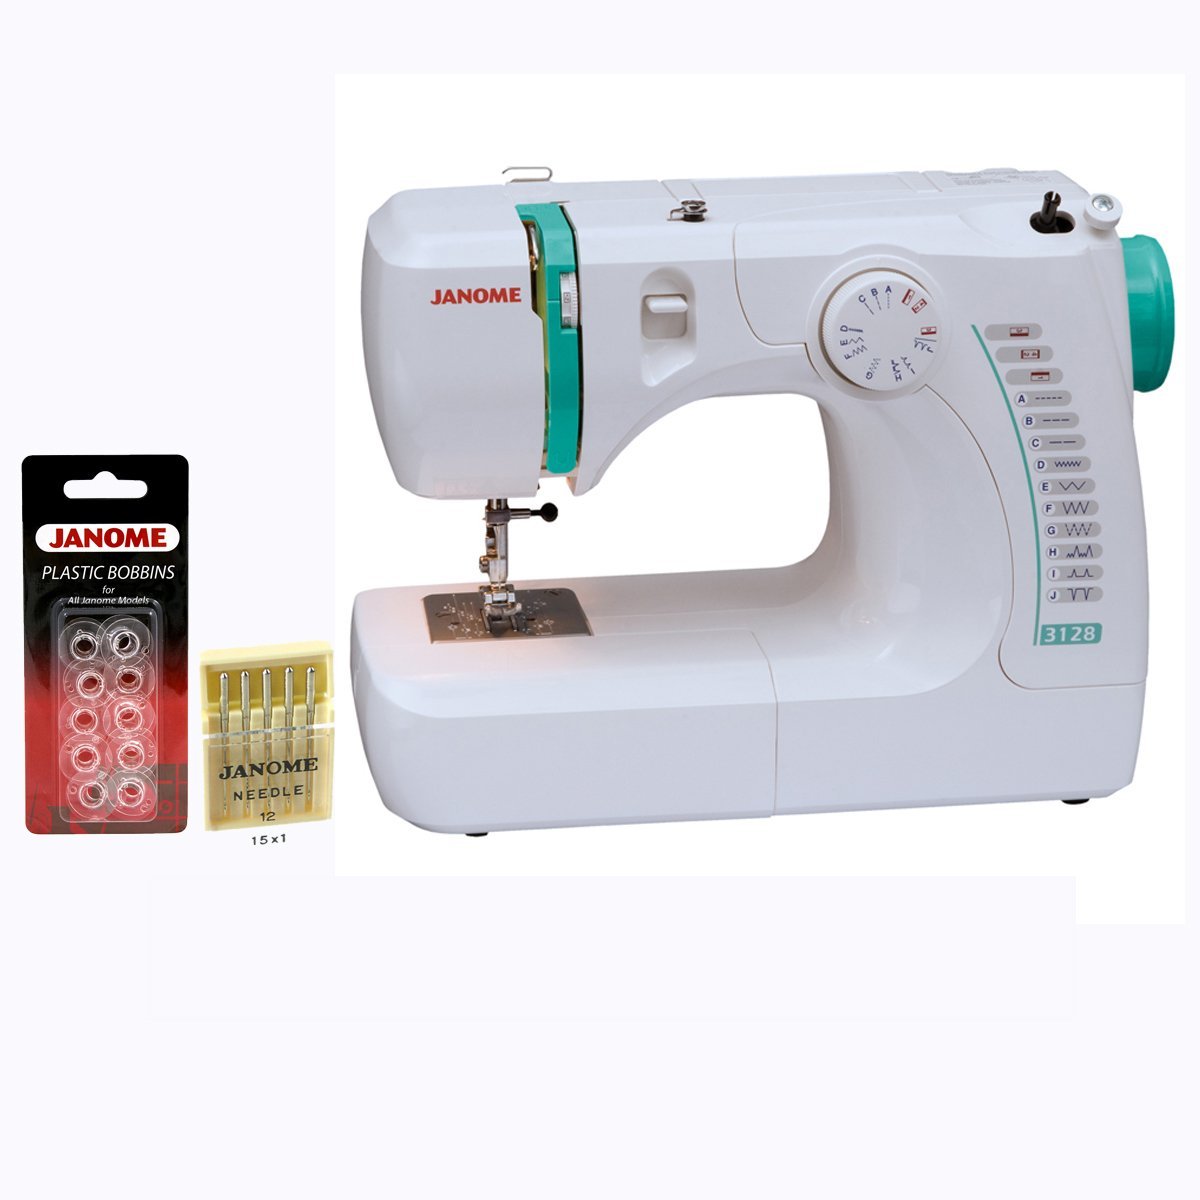 Janome sewing machine review: Dreaming of owning a Janome sewing machine but worried of your small budget? Don't worry, choose this option